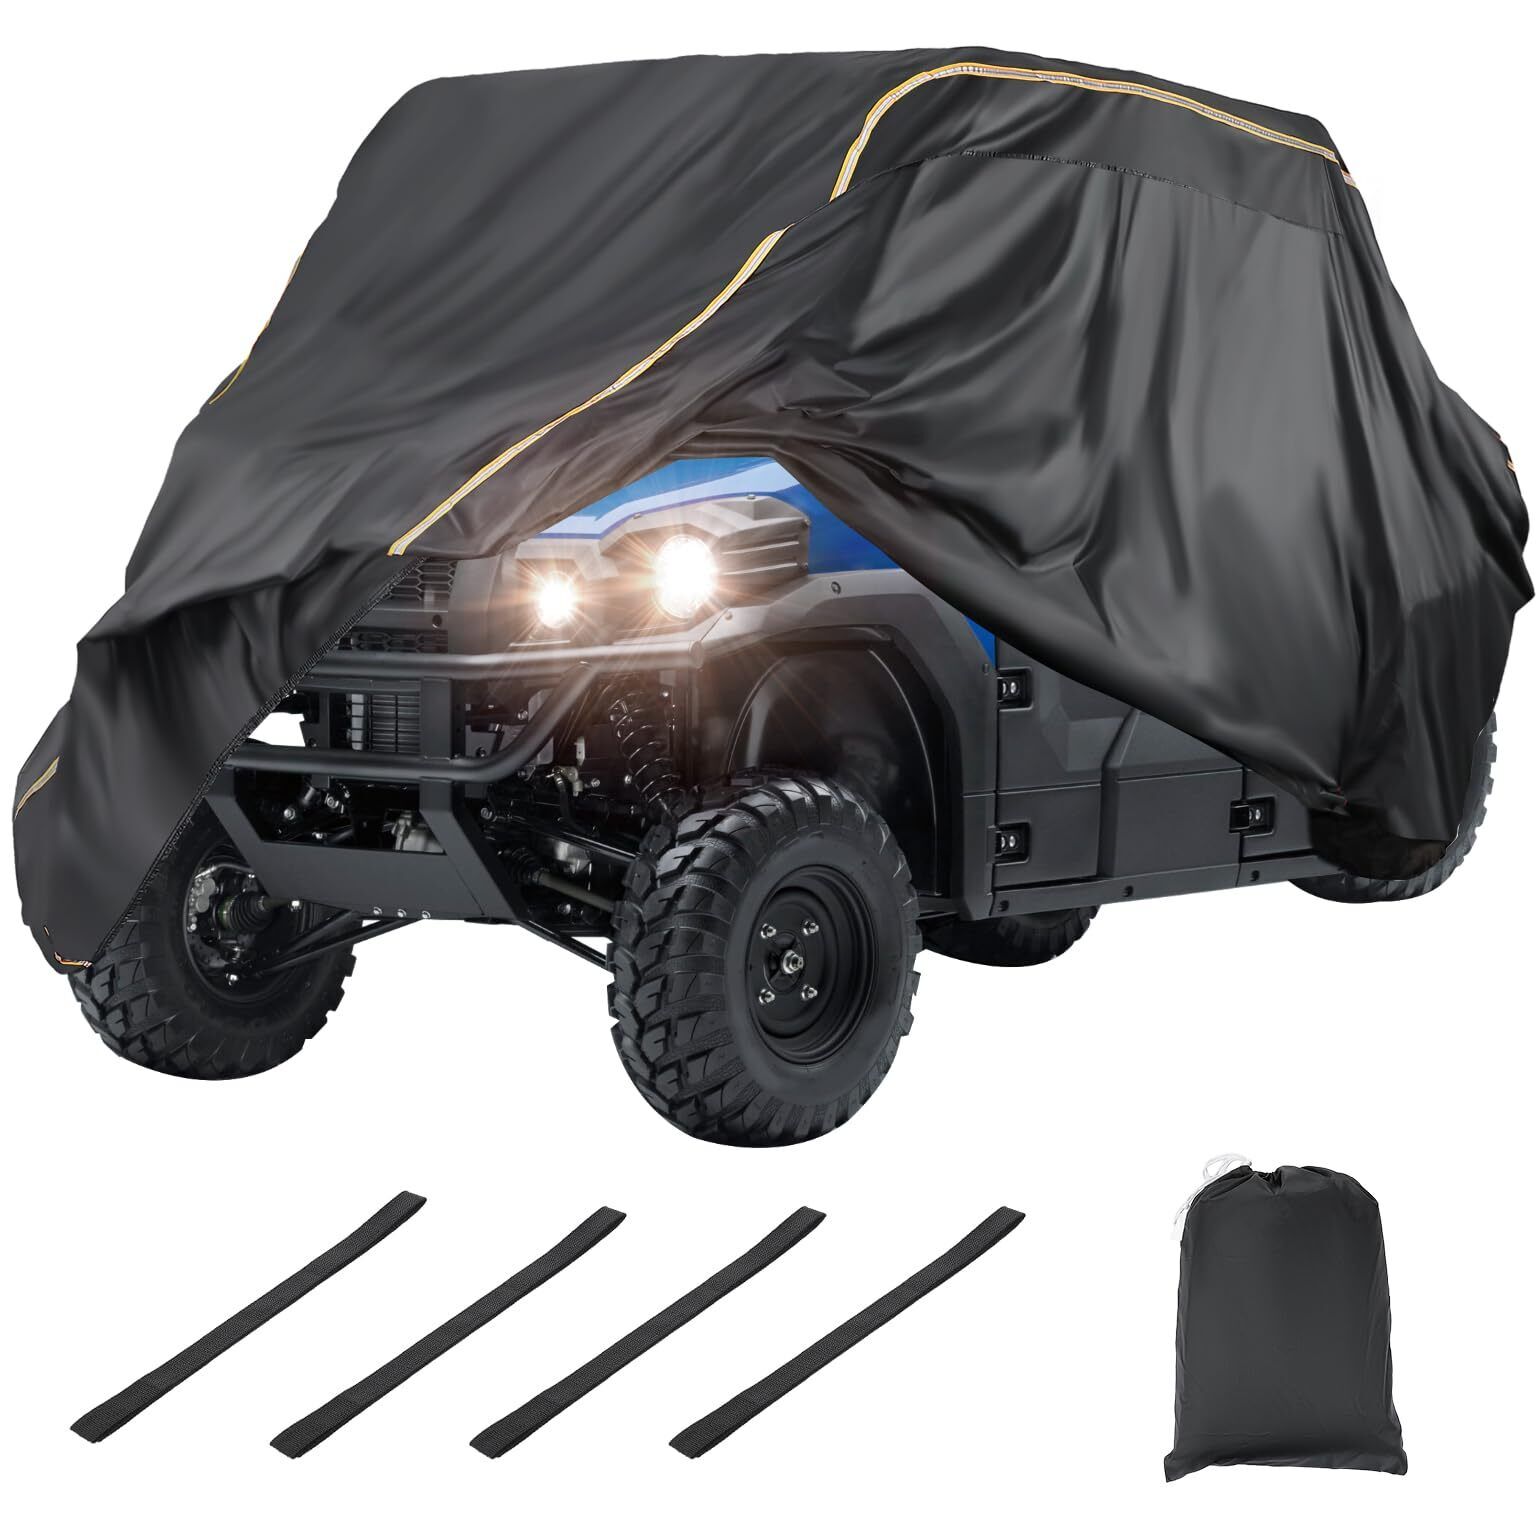 KEMIMOTO UTV Cover 4 Seater 420D Waterproof S Size Compatible with Polaris